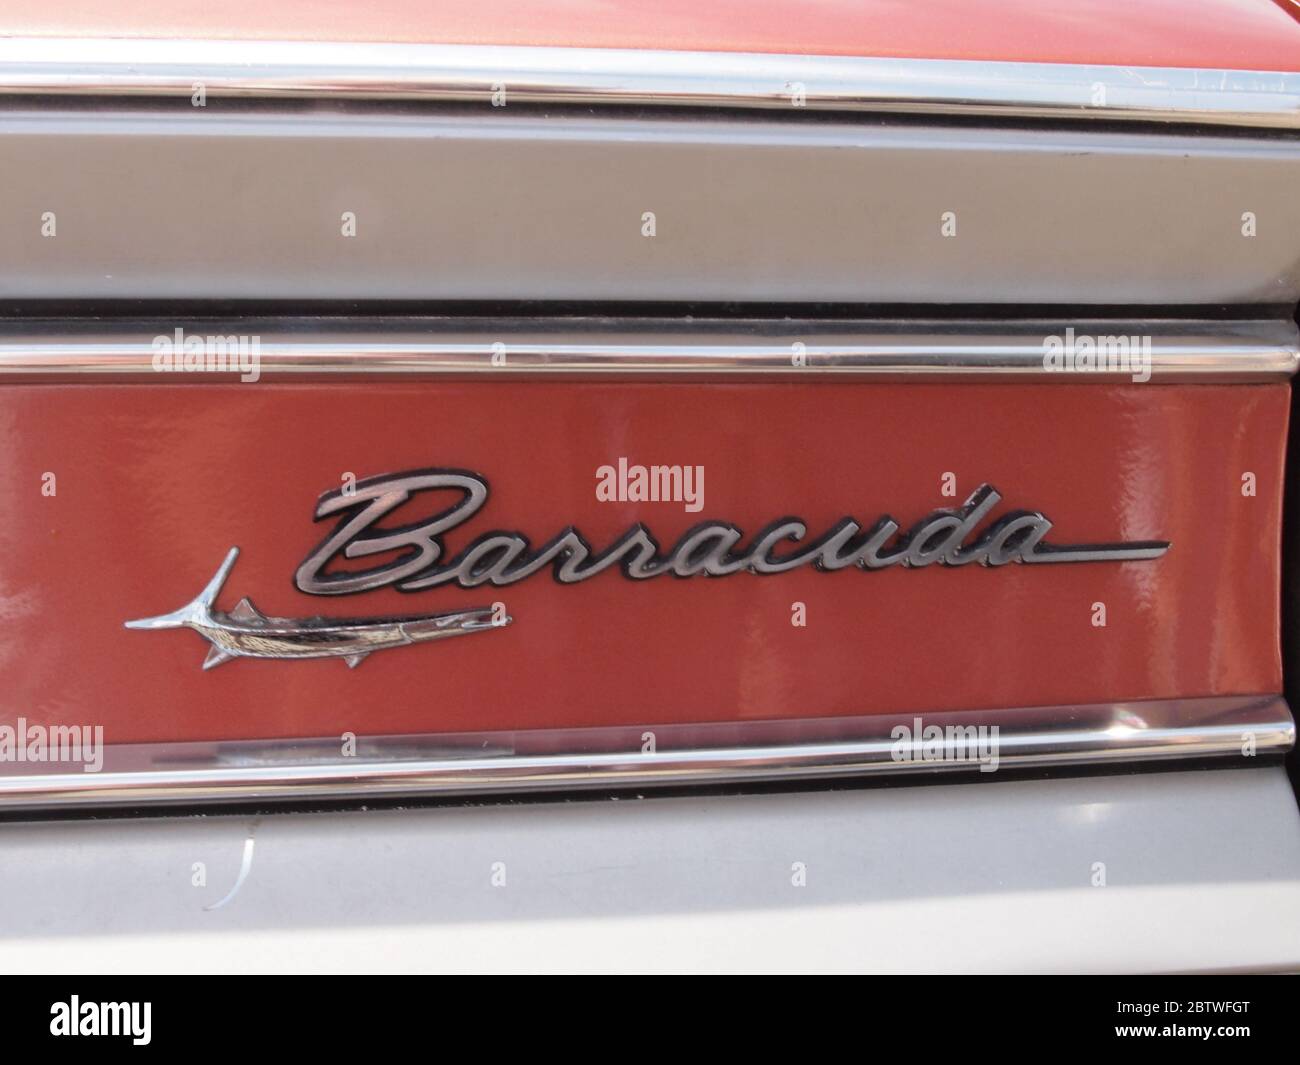 1967 Plymouth Barracuda rear detail showing the trademark symbol. Stock Photo